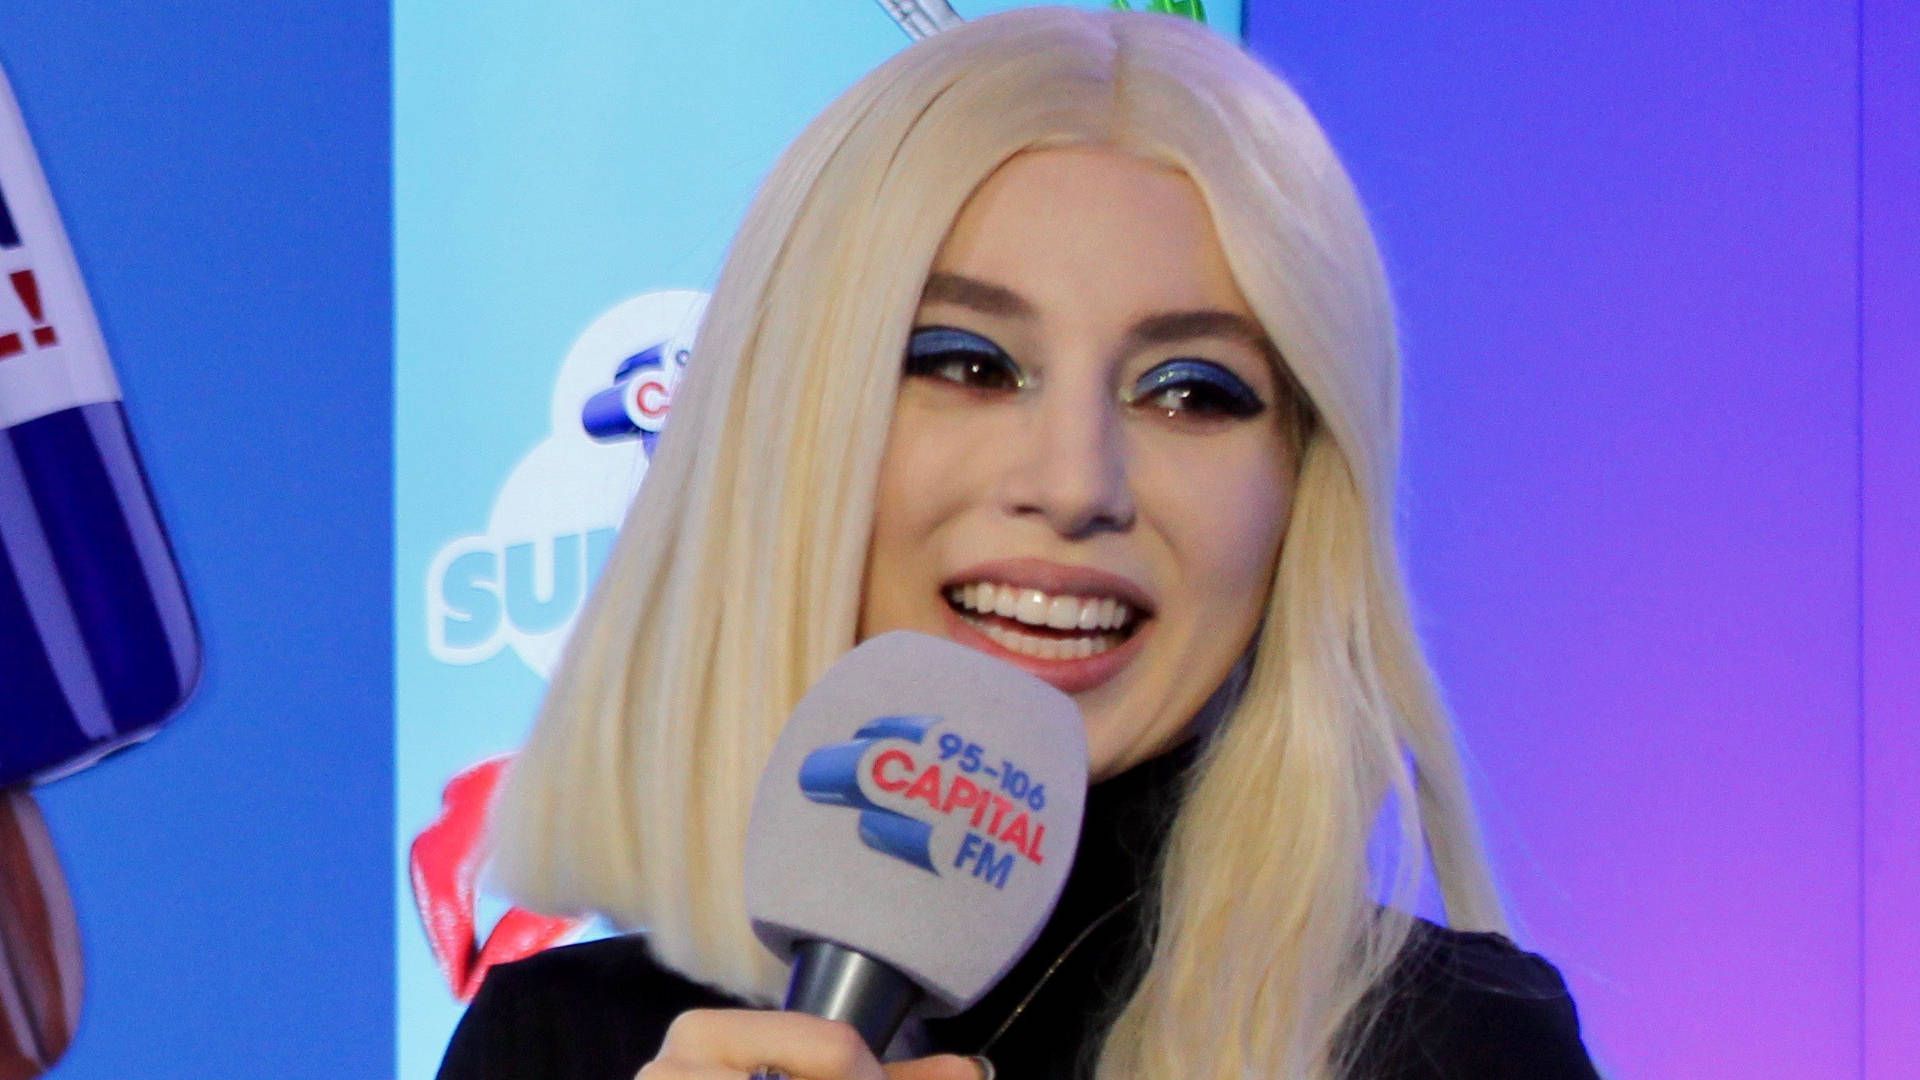 WATCH: Ava Max Calls 5 Seconds Of Summer The Most Psycho